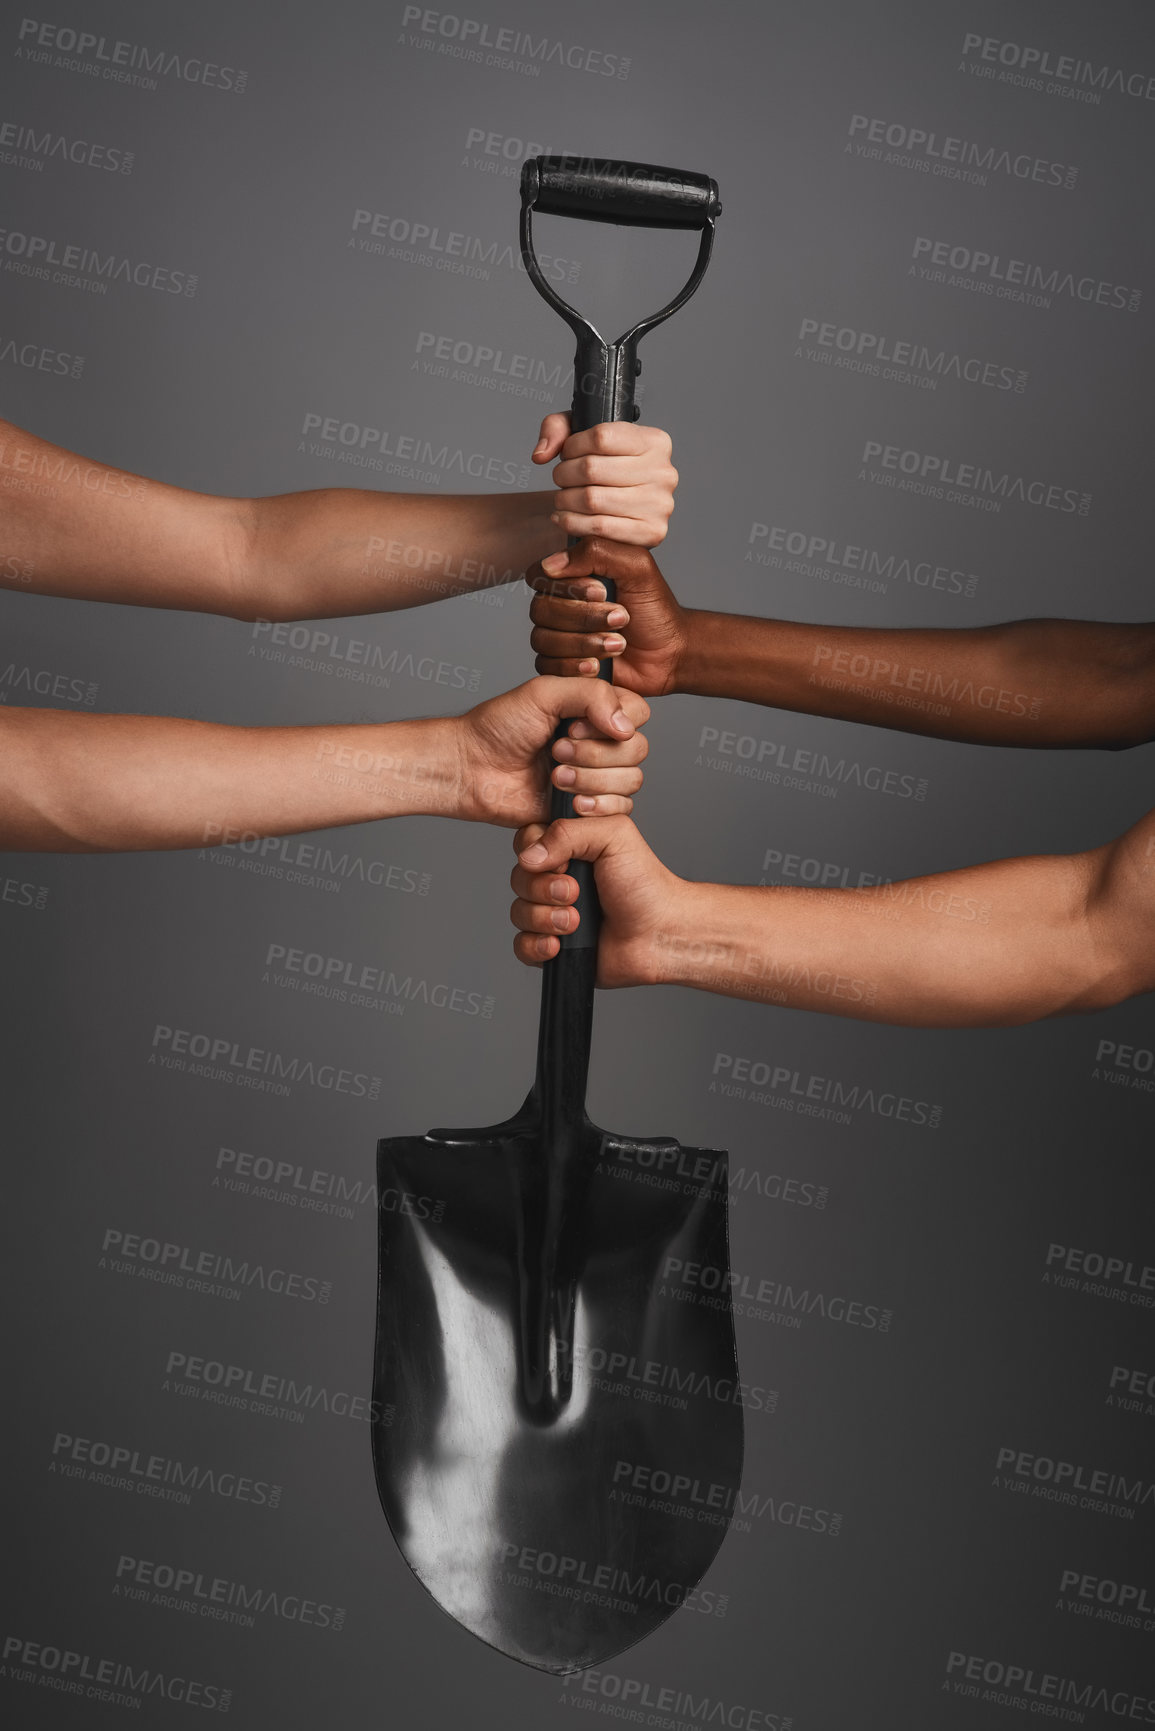 Buy stock photo Studio shot of unidentifiable hands holding on to a shovel against a gray background